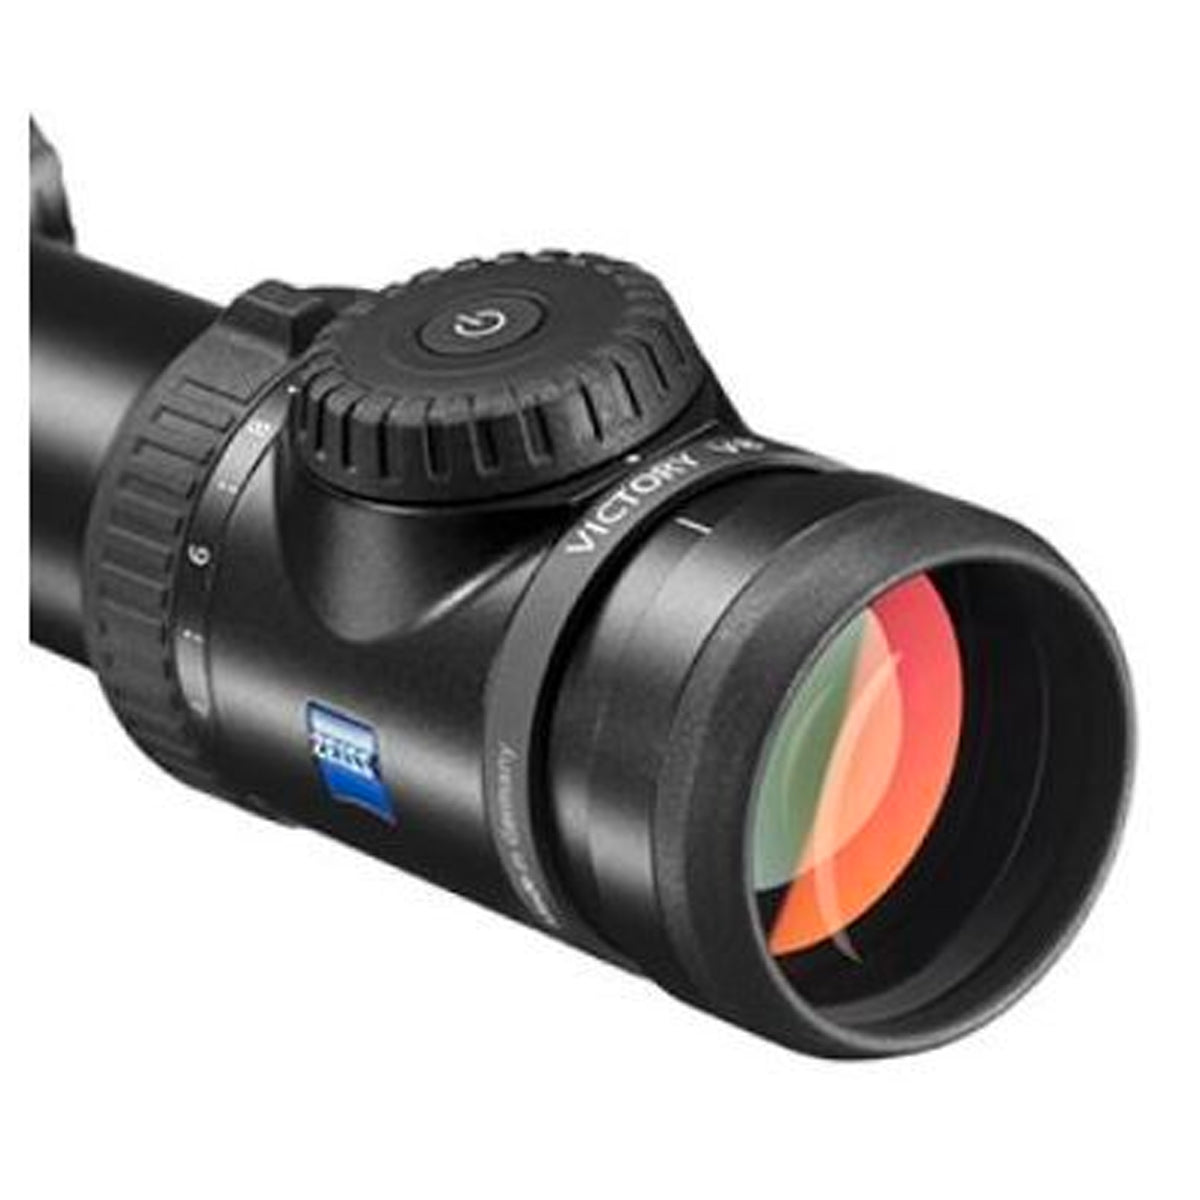 Zeiss Victory V8 1-8x30 Riflescope in Zeiss Victory V8 1-8x30 Riflescope by Zeiss | Optics - goHUNT Shop by GOHUNT | Zeiss - GOHUNT Shop